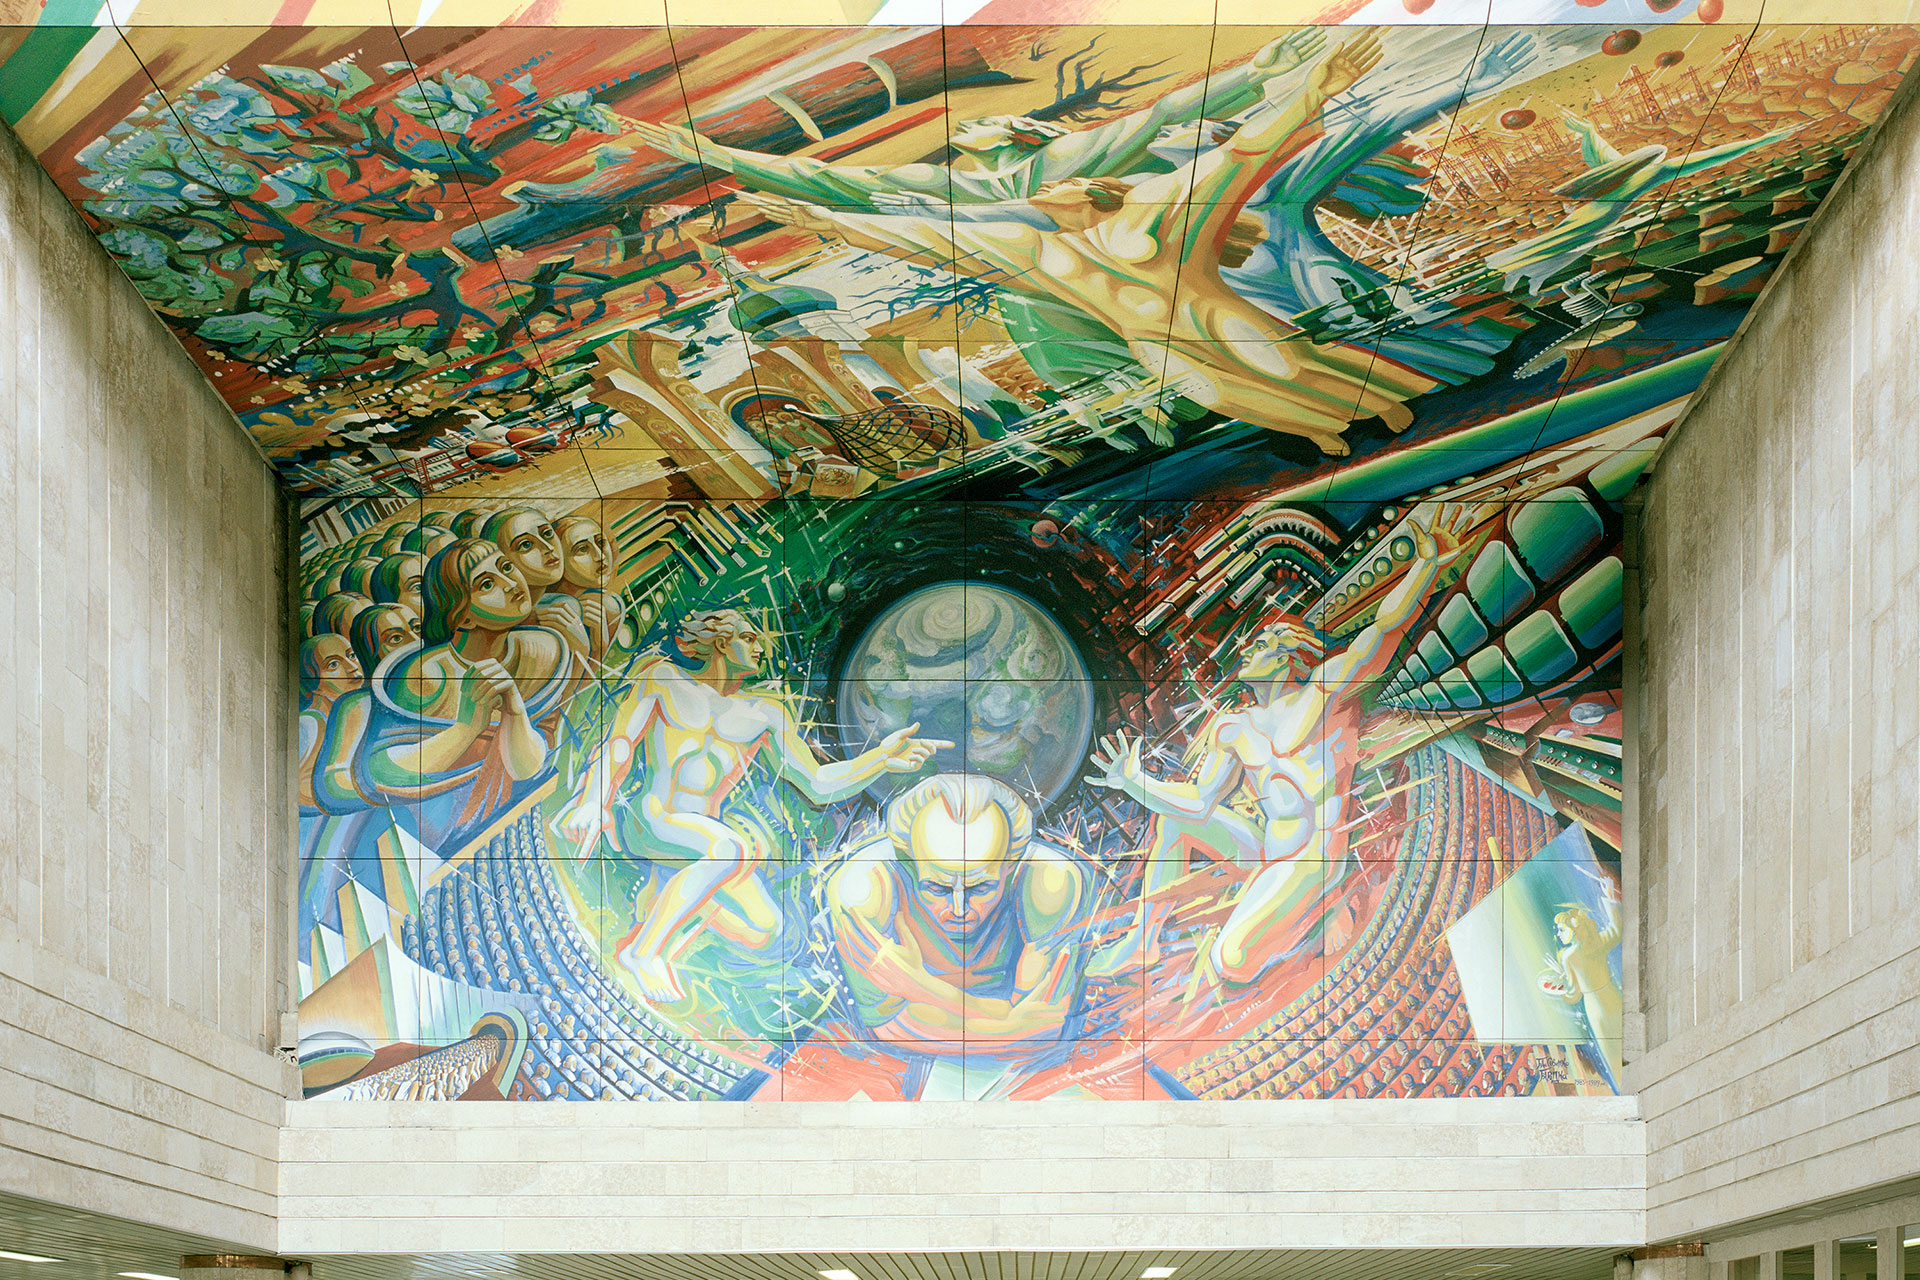 Mural in the Vernadsky National Library of Ukraine (Image: Egor Rogalev from his series Synchronicity)